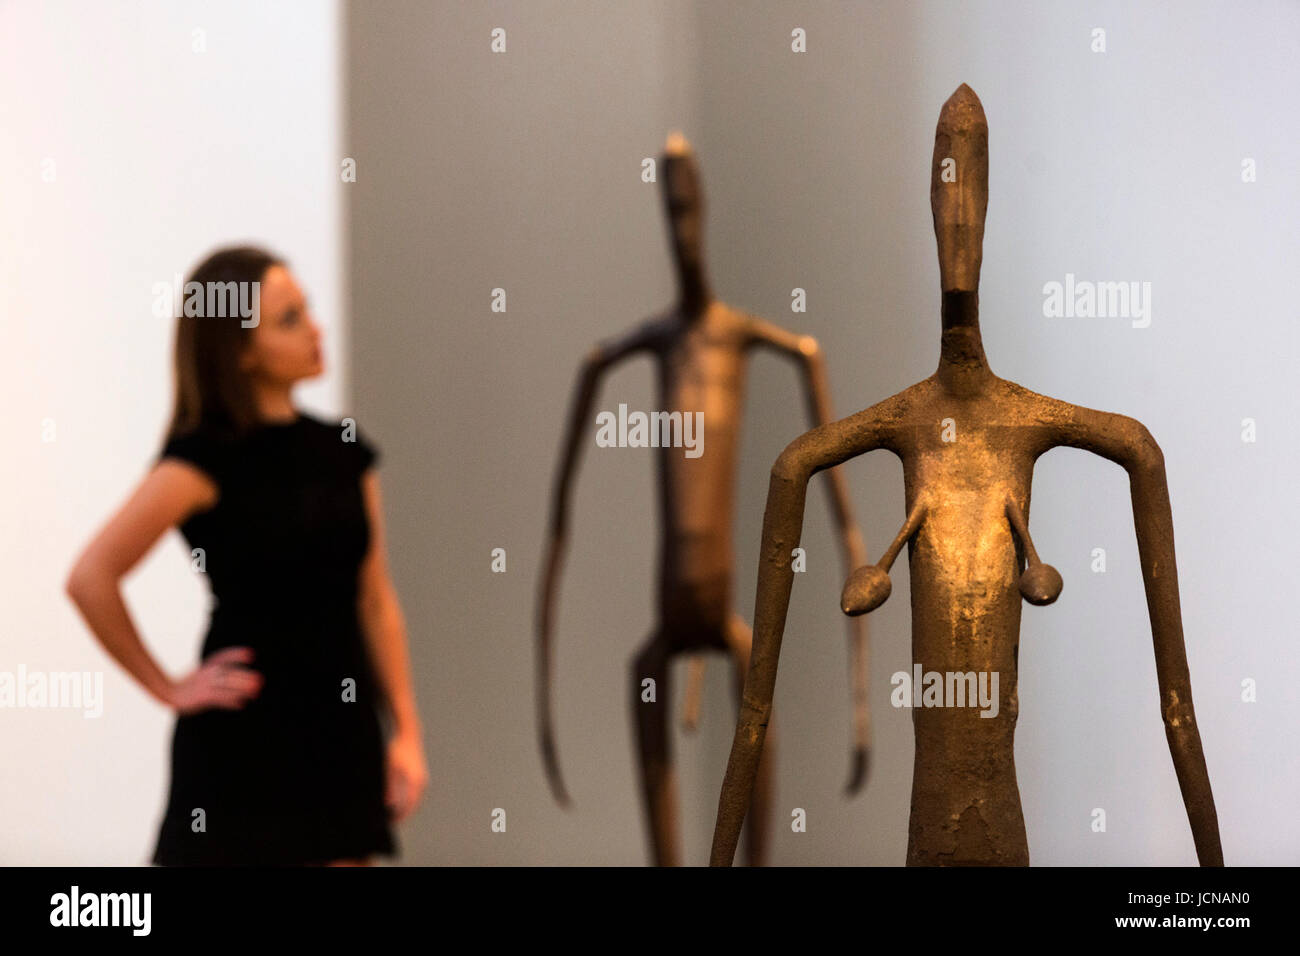 London, UK. 16 June 2017. A Christie's employee looks at the Antony Gromley sculptures Inside Australia Prototype Simon Jones and Tamara Jenks, estimate GBP 120,000-180,000 each. Auction house Christie's presents a preview of the Modern British and Irish Art sale on 26 June 2017. Stock Photo